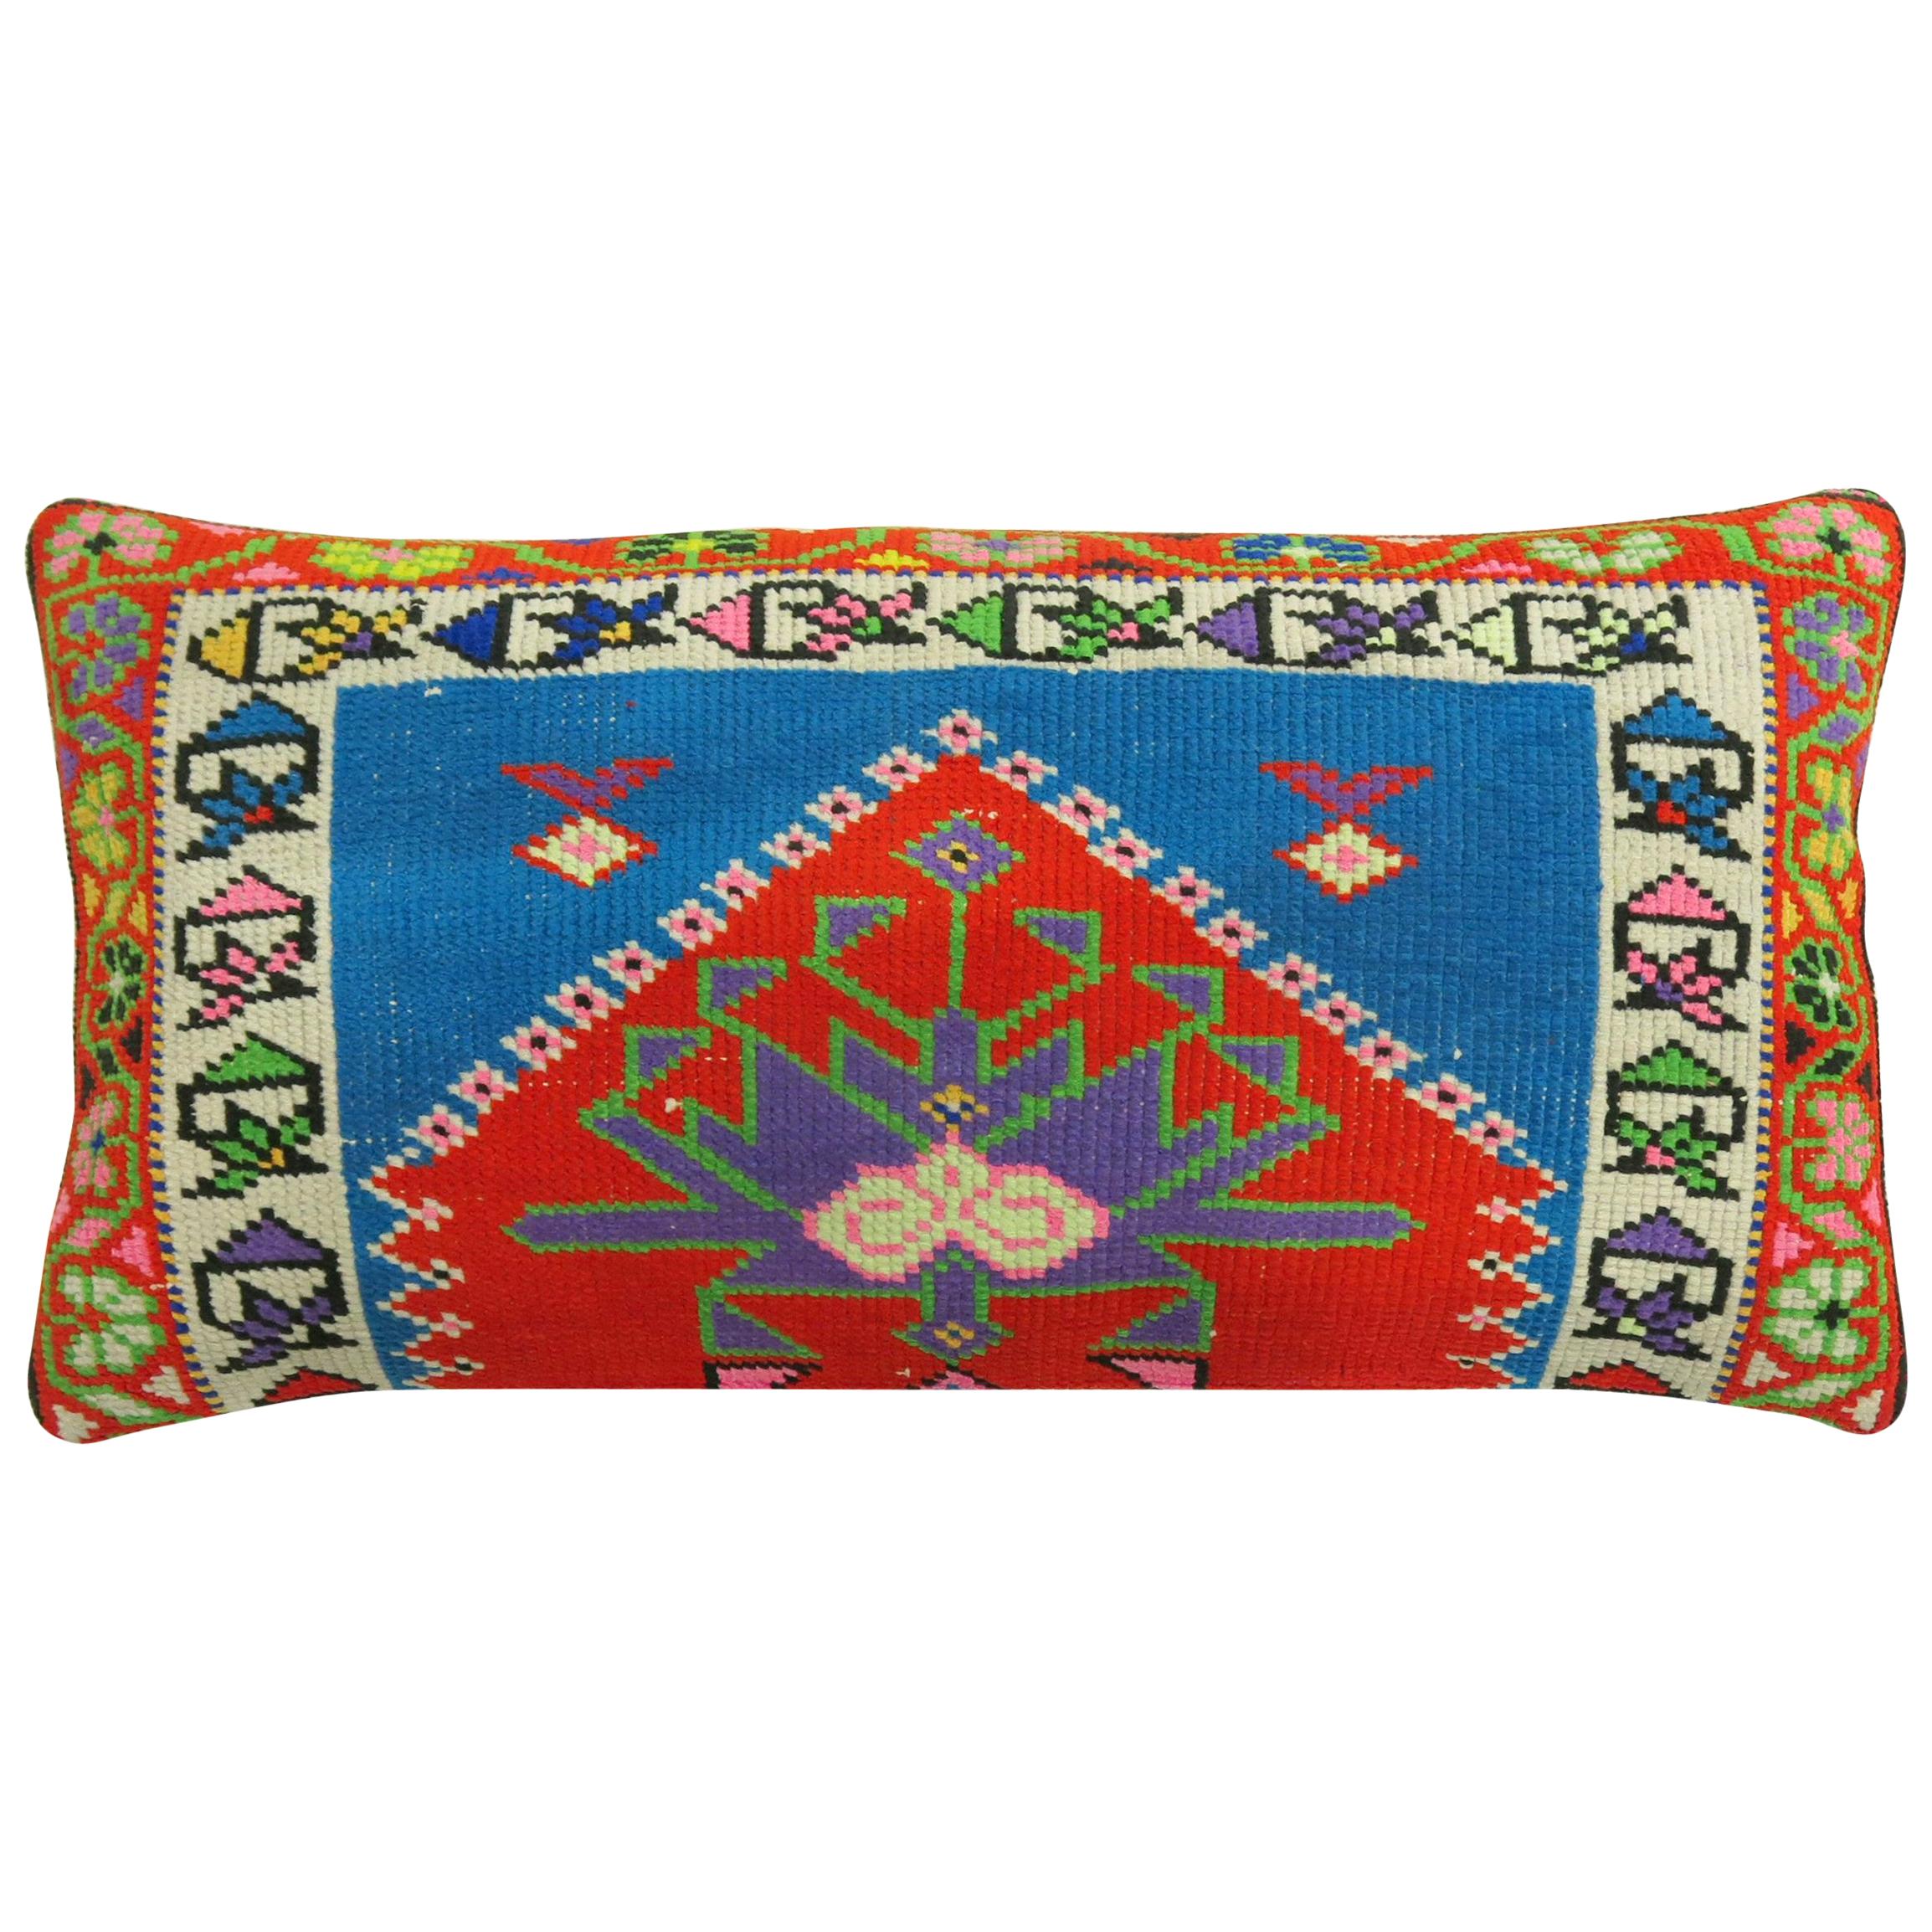 Vibrant Red and Blue Large Vintage Turkish Rug Pillow